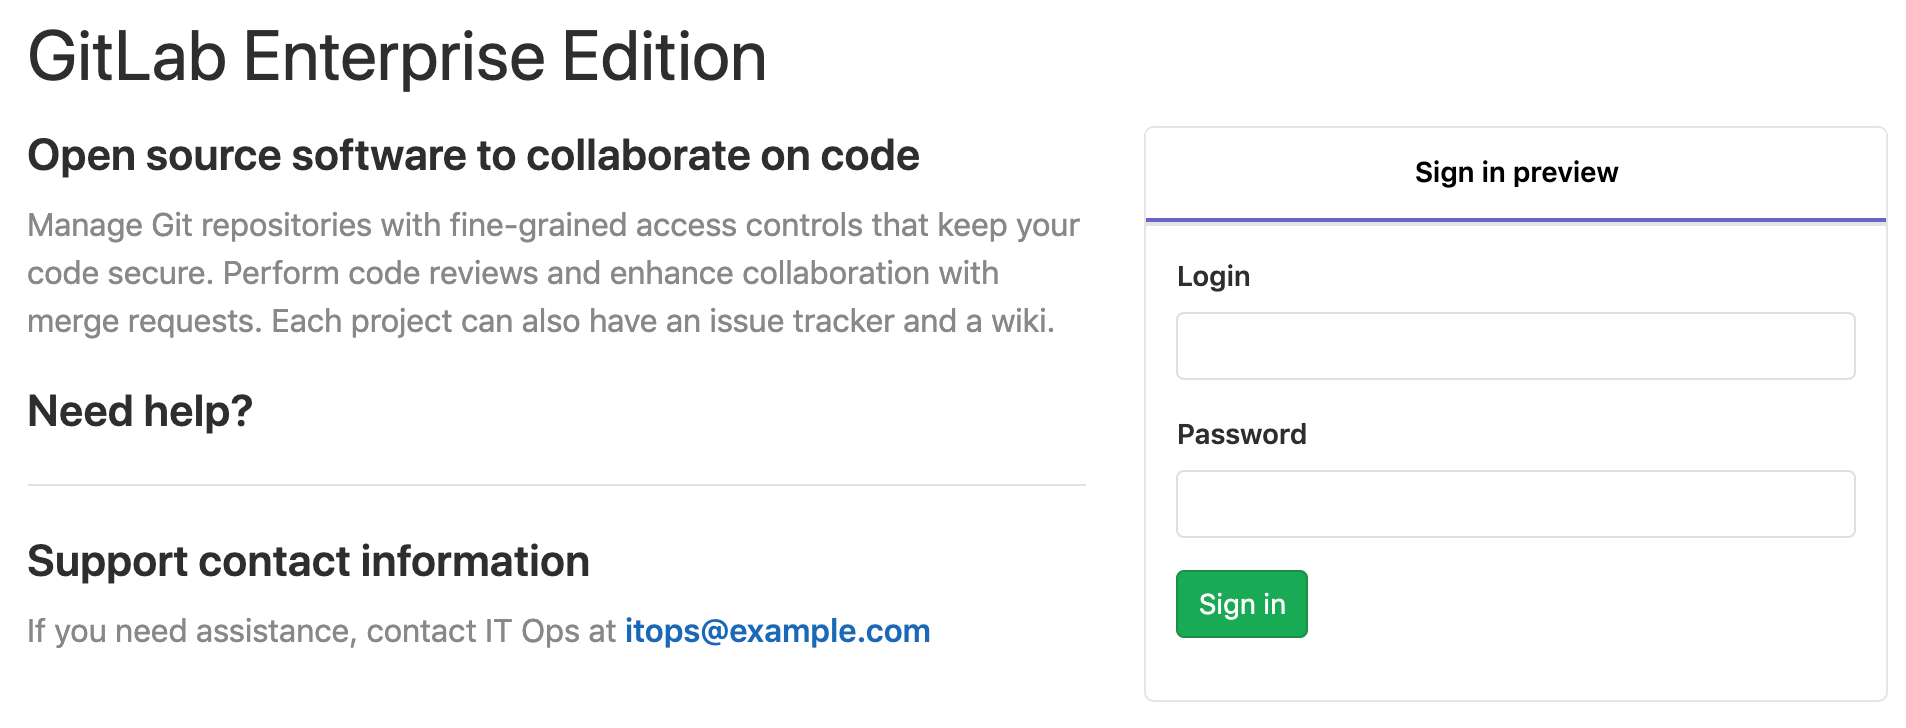 help message on login page example